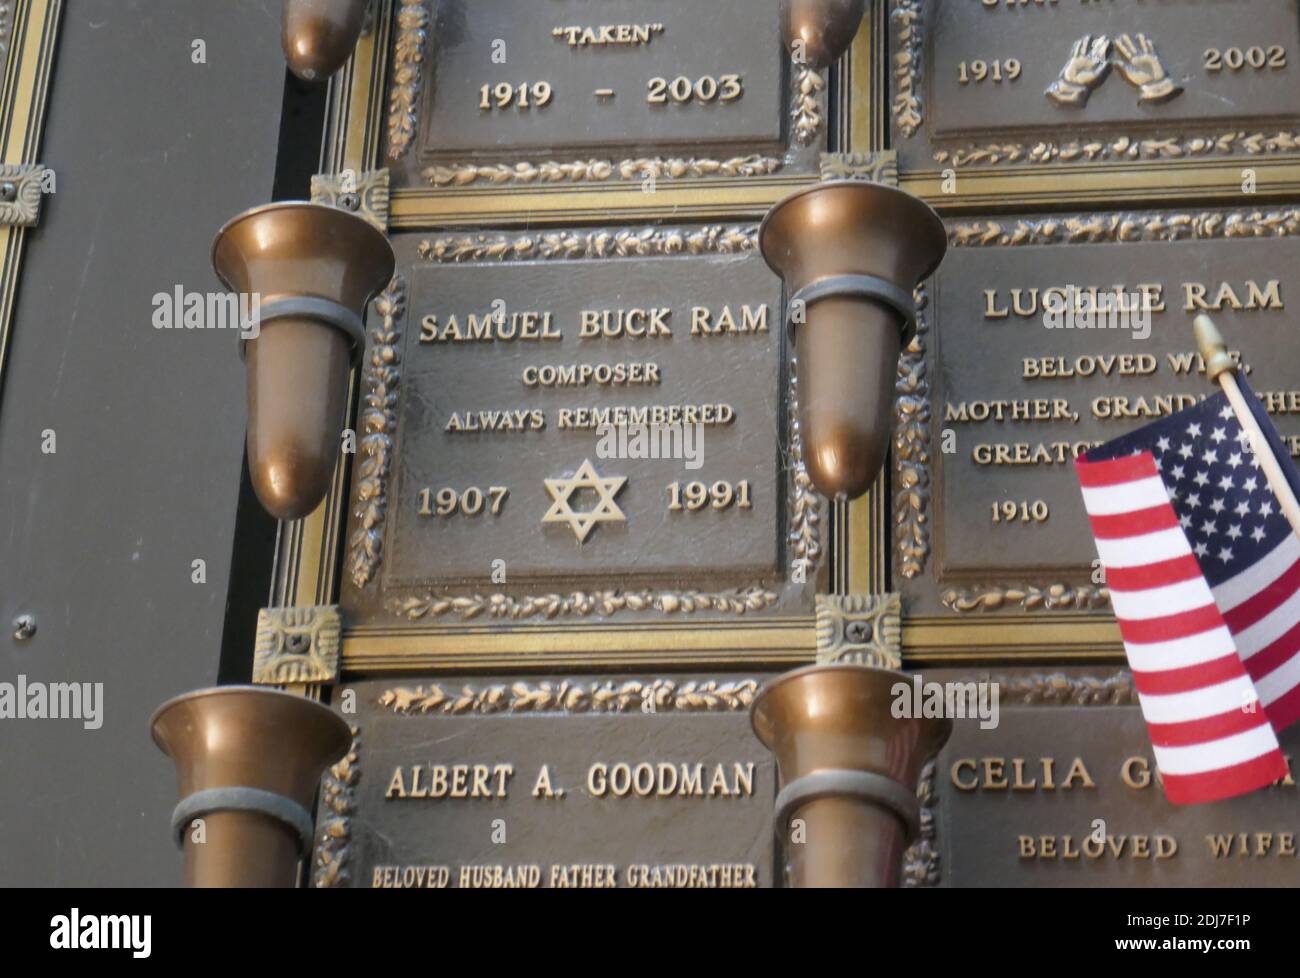 Mission Hills, California, USA 6th December 2020 A general view of atmosphere of composer Buck Ram's Grave in Court of the Tribes Mausoleum at Eden Memorial Park Cemetery on December 6, 2020 in Mission Hills, California, USA. Photo by Barry King/Alamy Stock Photo Stock Photo